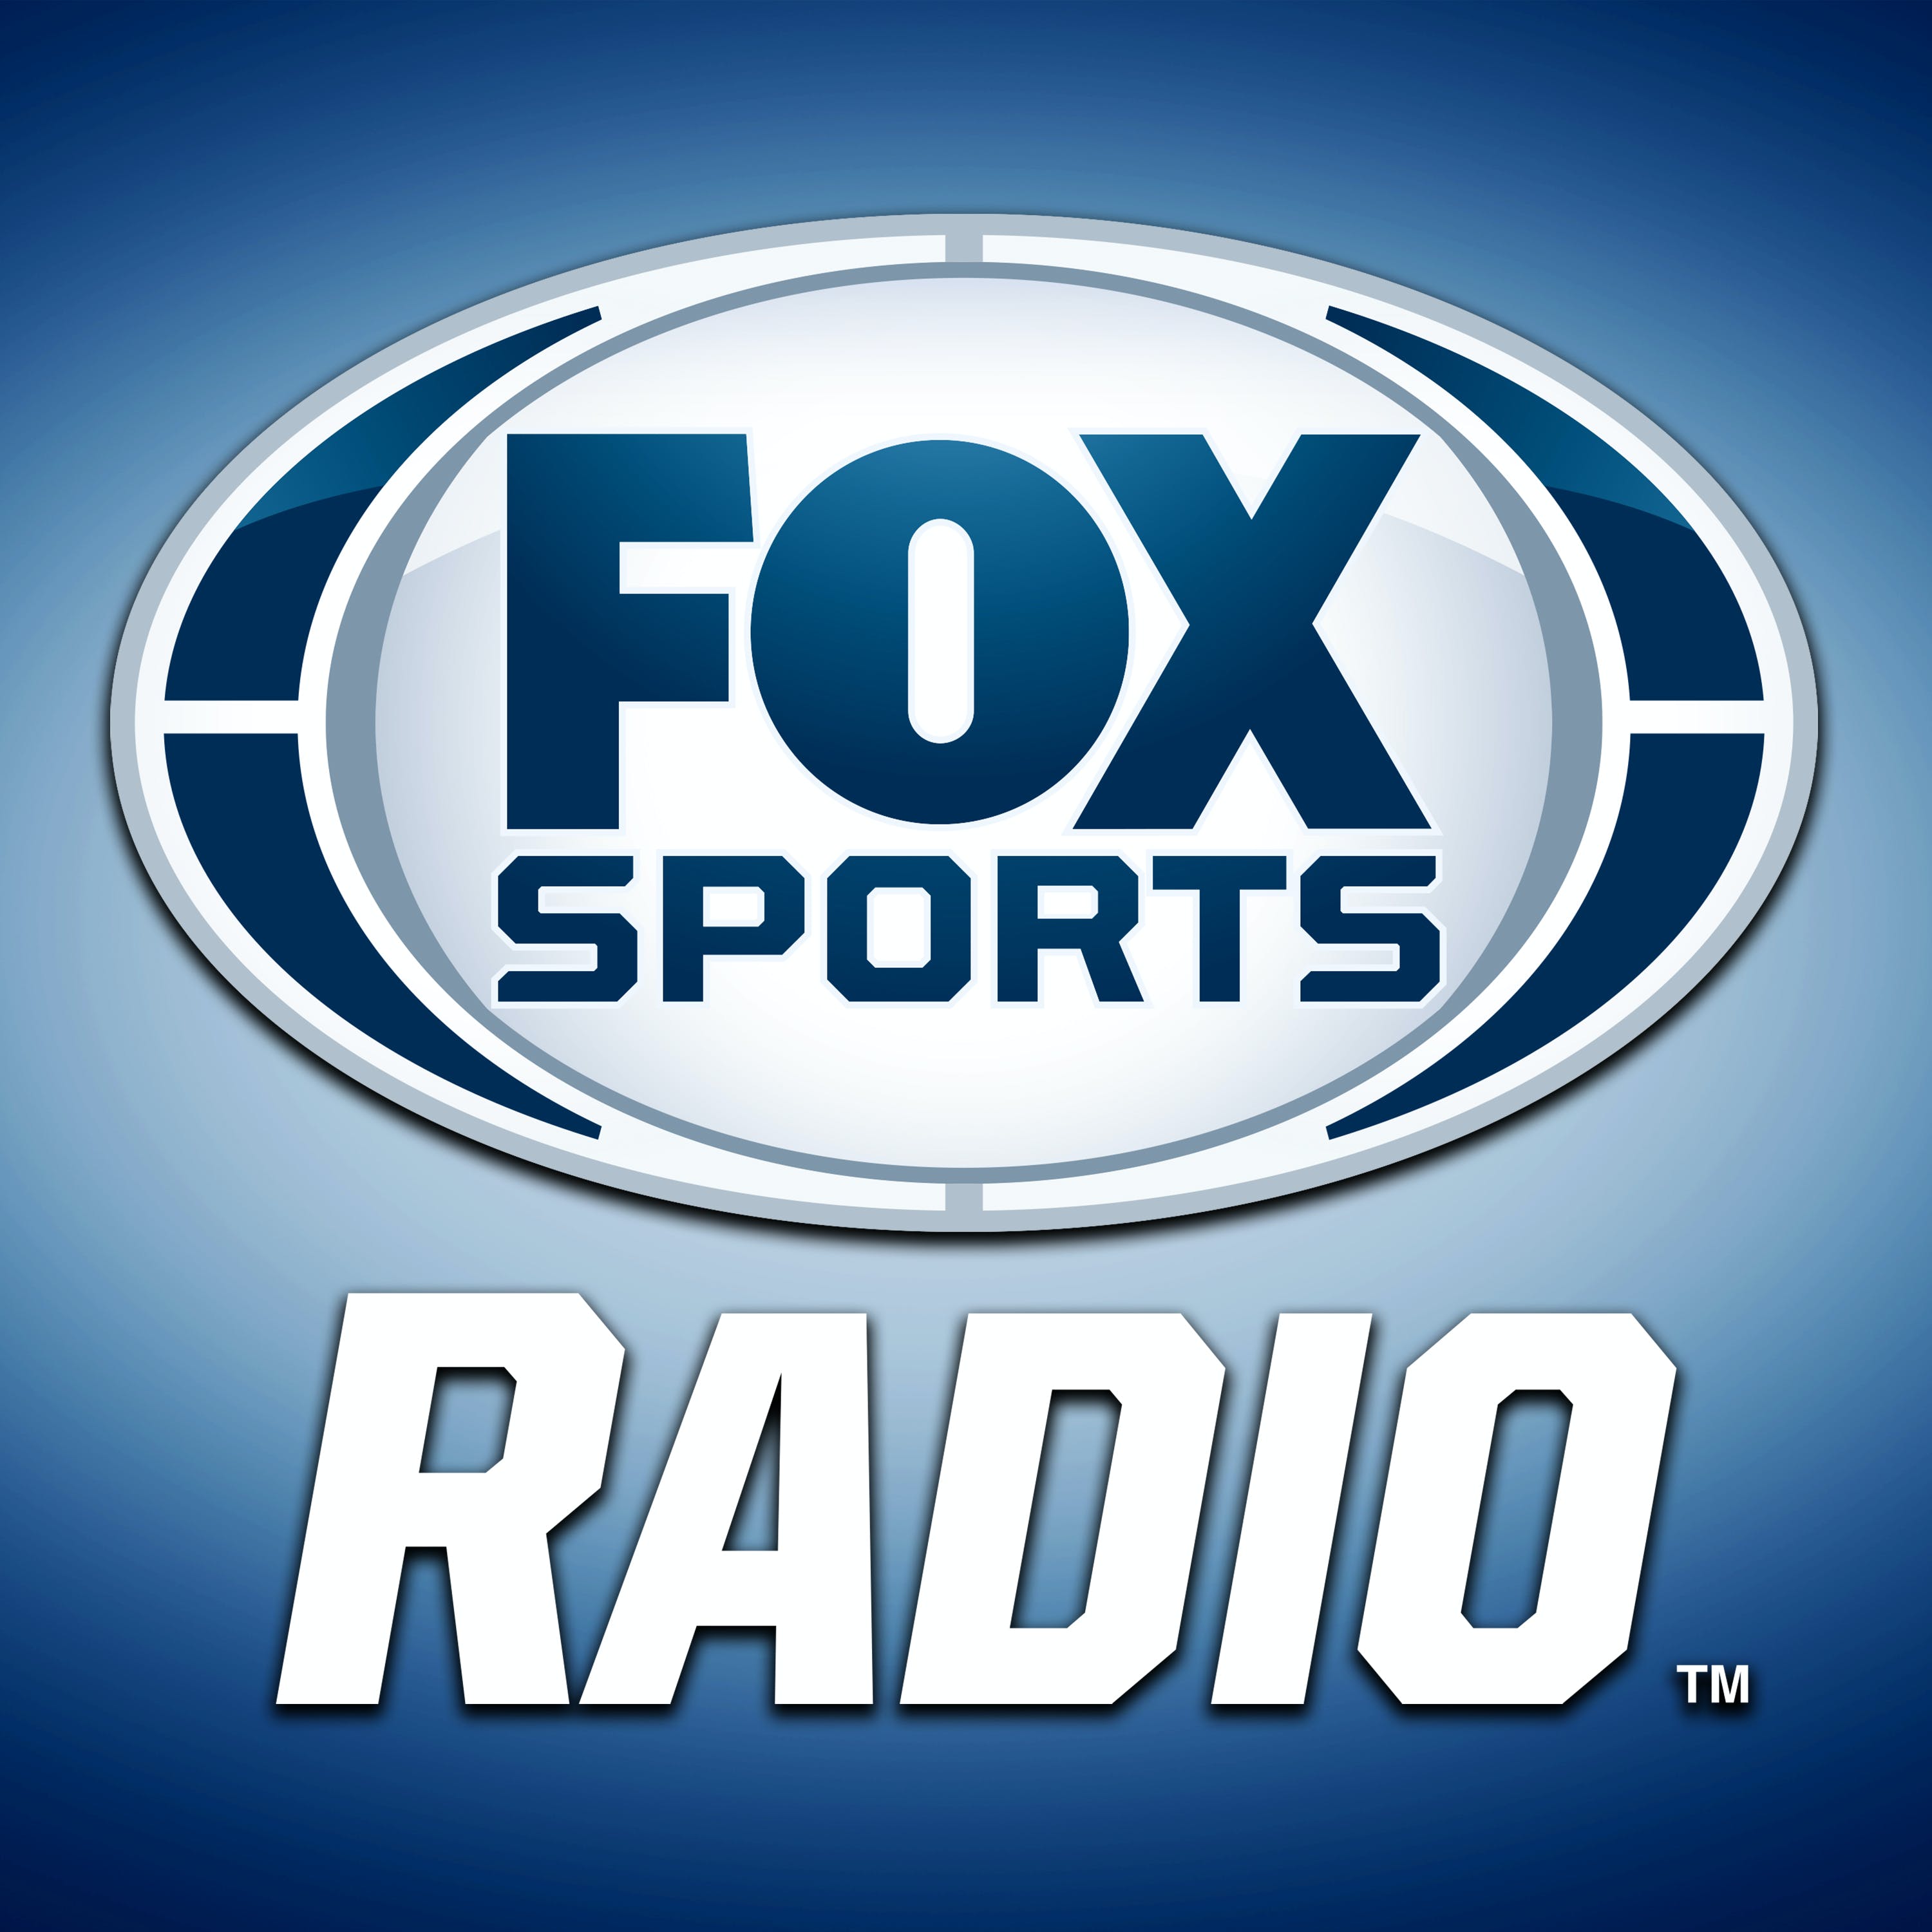 05/08/2021 – Fox Sports Saturday with Arnie Spanier and Aaron Torres